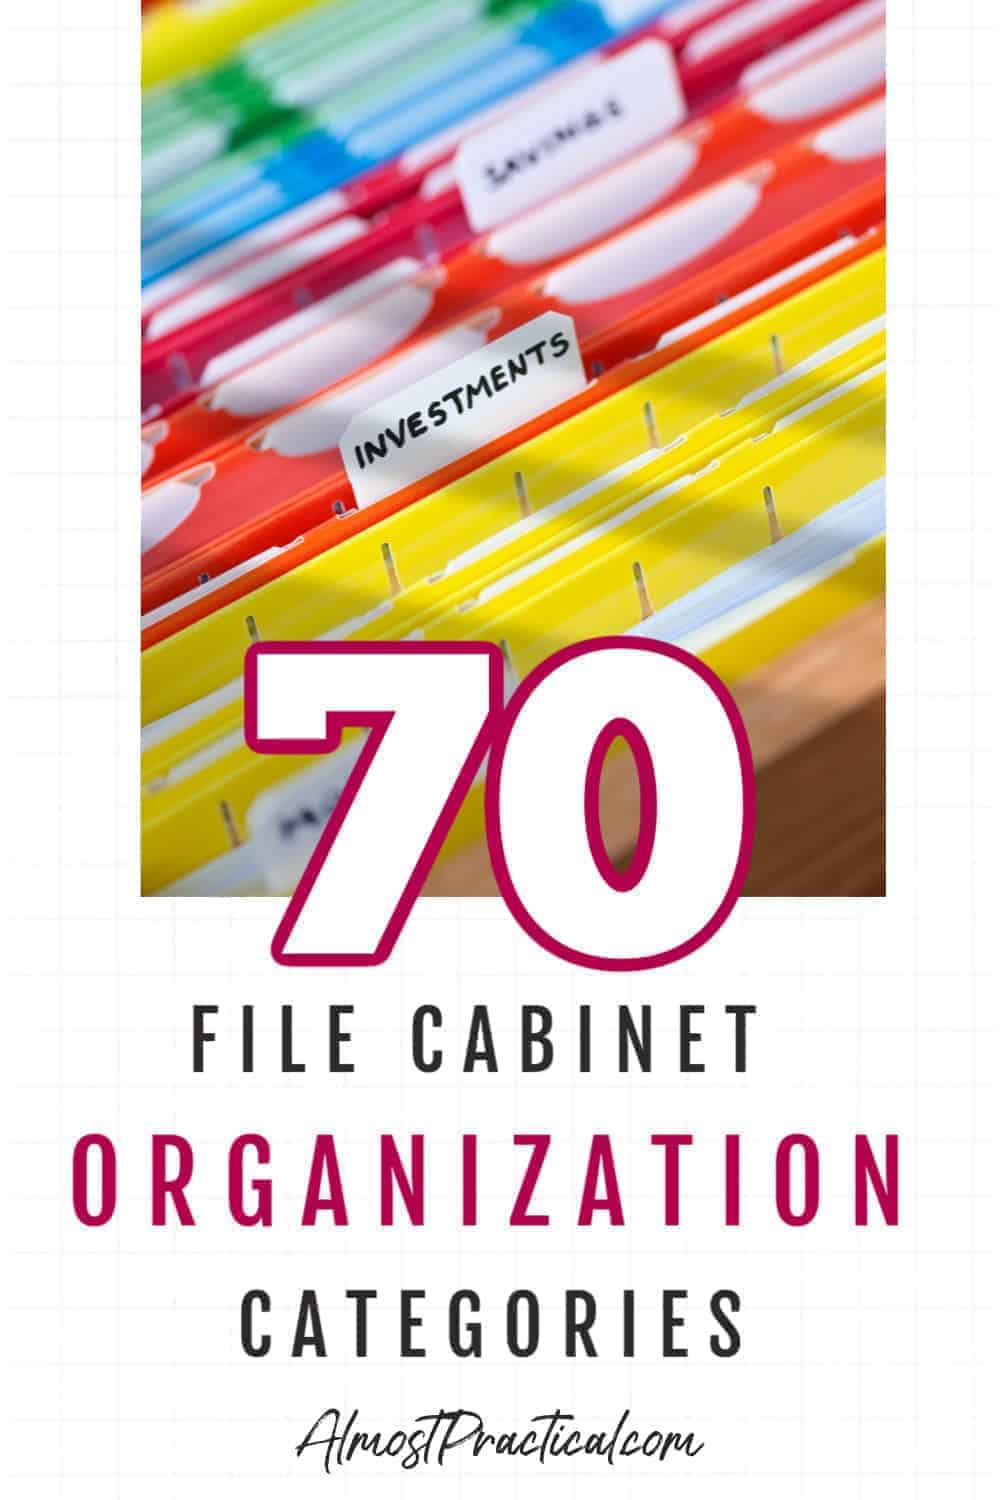 70 File Cabinet Organization Categories to Help You Conquer Your Paperwork